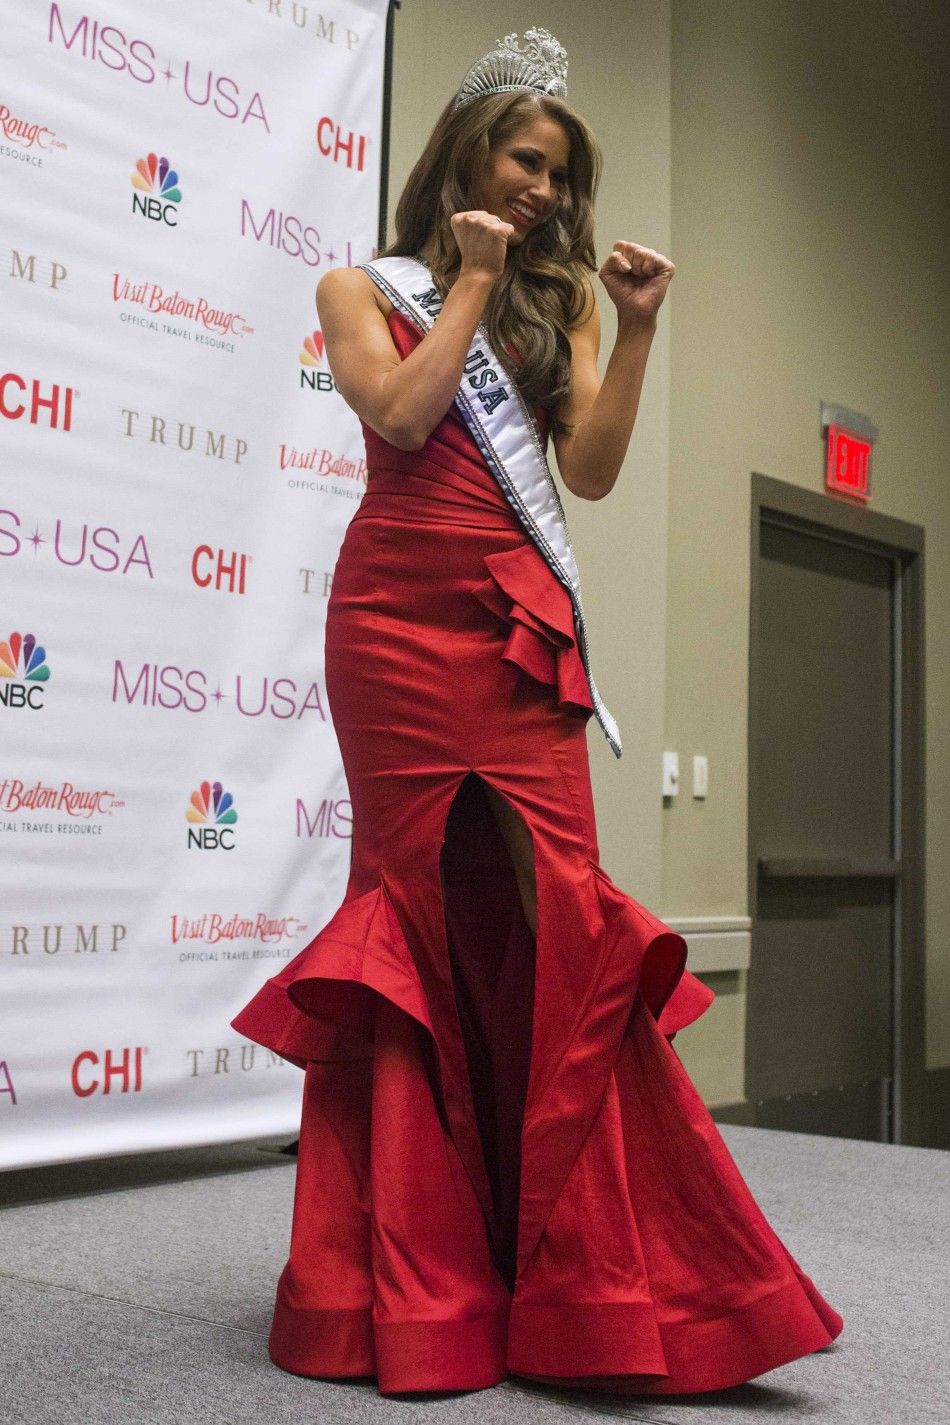 Miss Nevada Nia Sanchez poses in a taekwondo martial art stance for the media at a news conference after she won the 2014 Miss USA beauty pageant in Baton Rouge, Louisiana June 8, 2014. Fifty-one state titleholders compete in the swimsuit, evening gown an